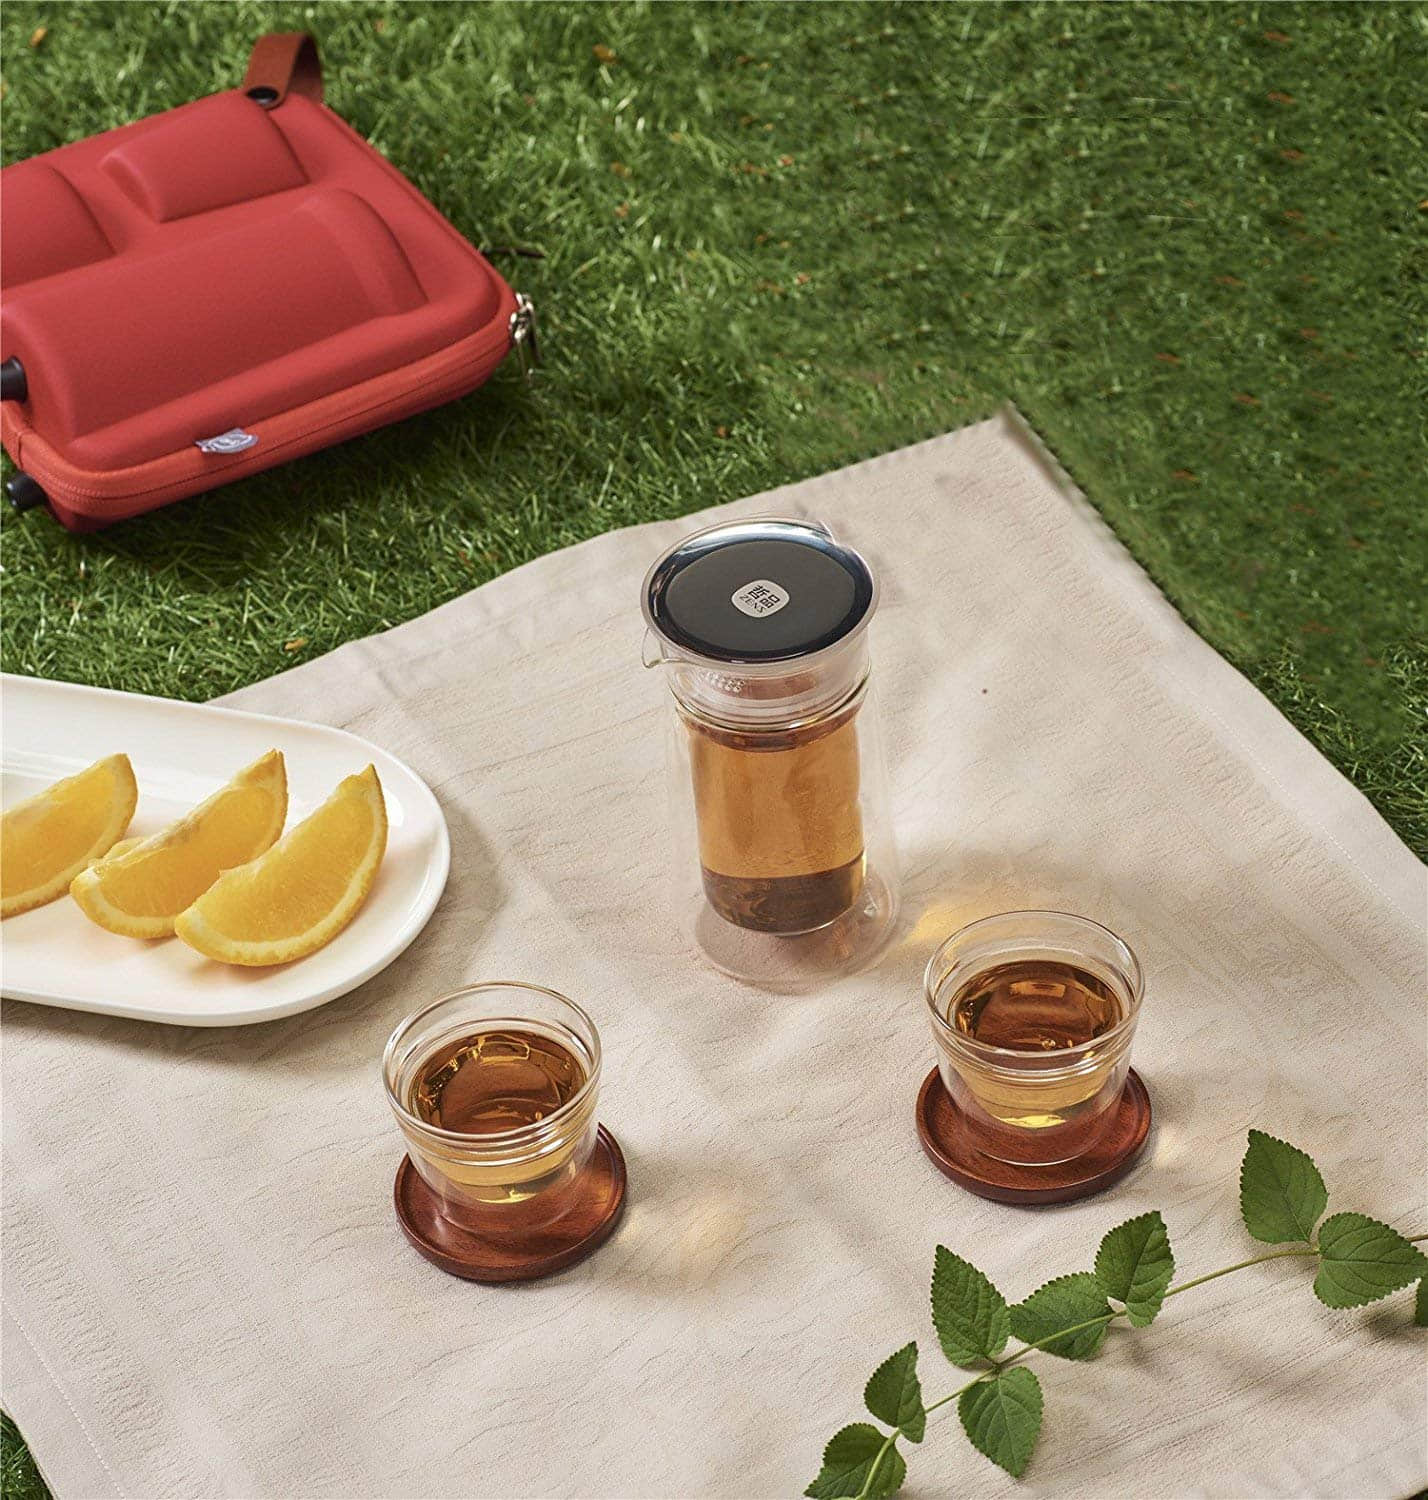 ZENS | Mobile Moon Portable Tea Set | Double Wall Glass Teapot with Built in Infuser | 2 Glass Tea Cups | Portable Design 